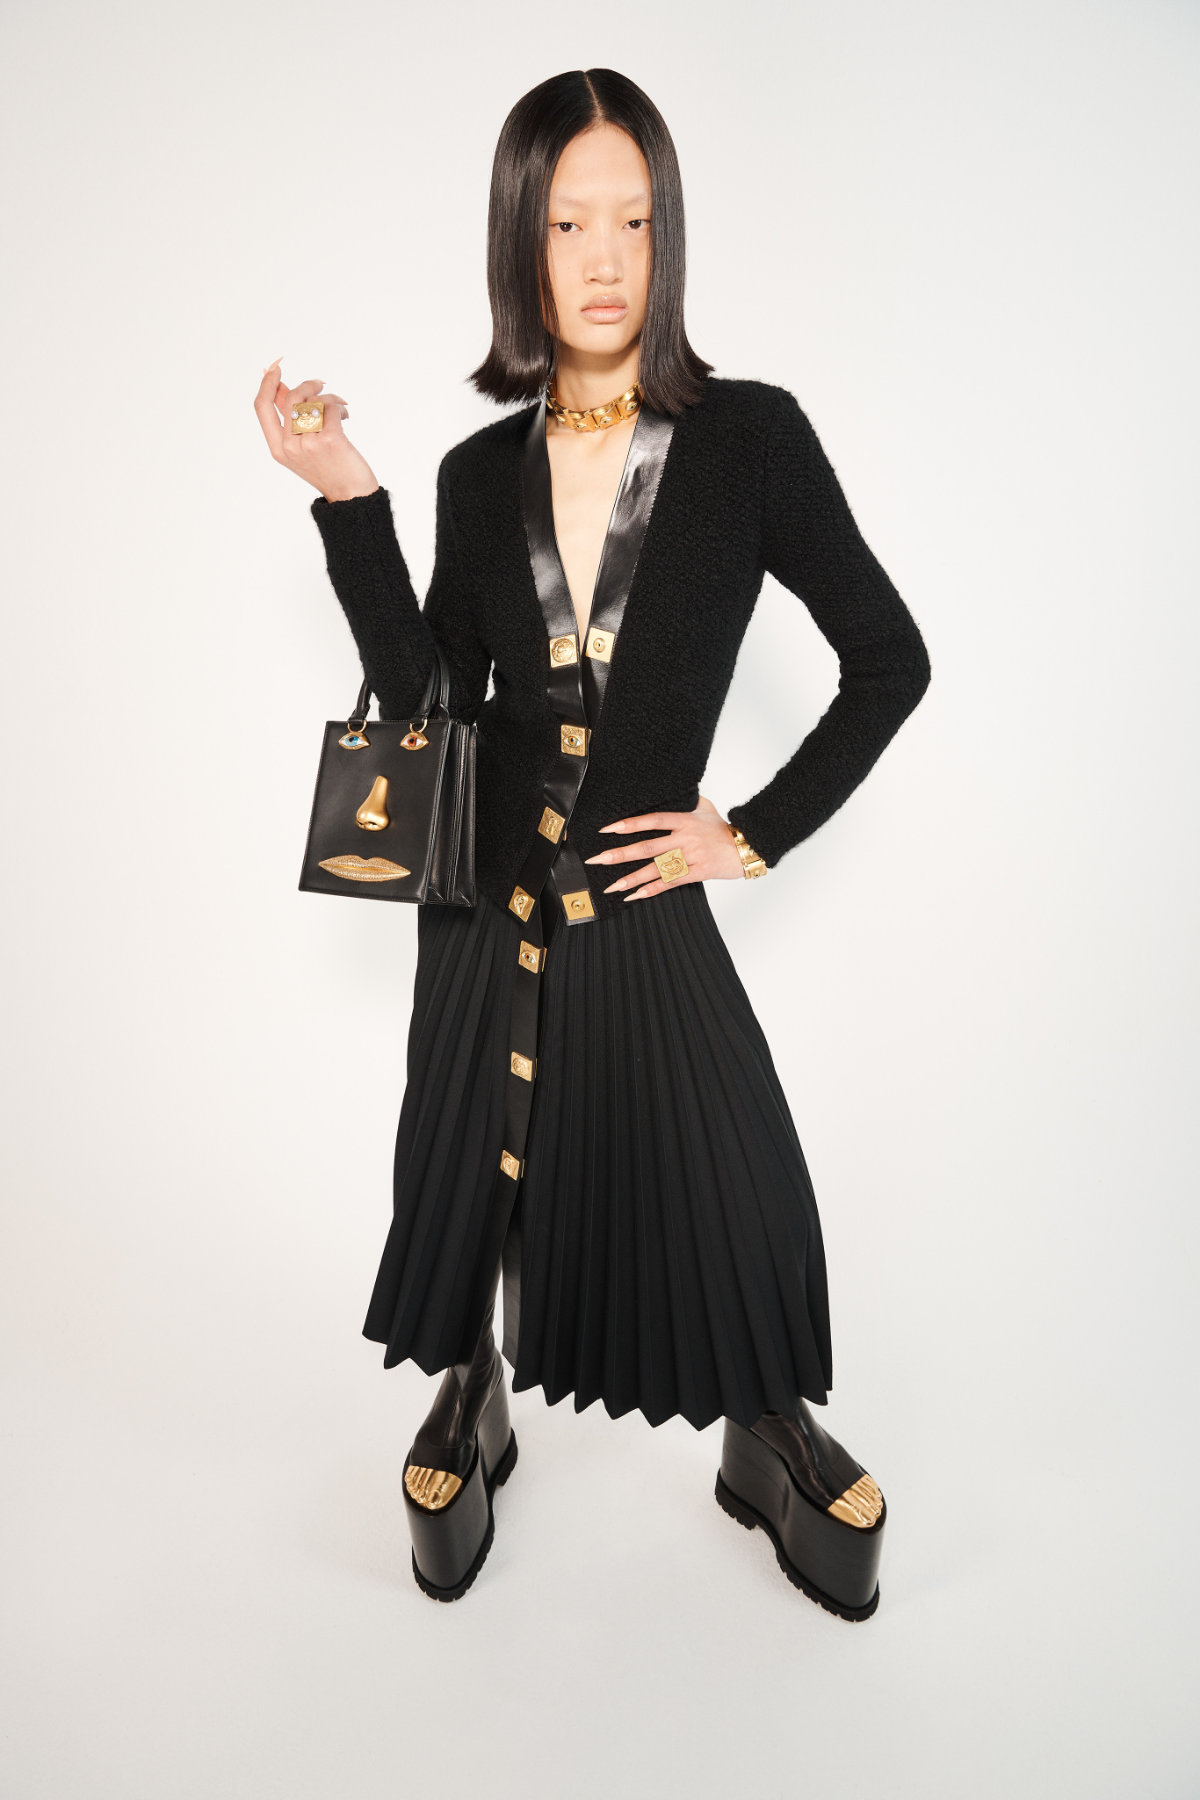 Schiaparelli Presents Its Fascinating RTW Fall-Winter 2021/22 Collection